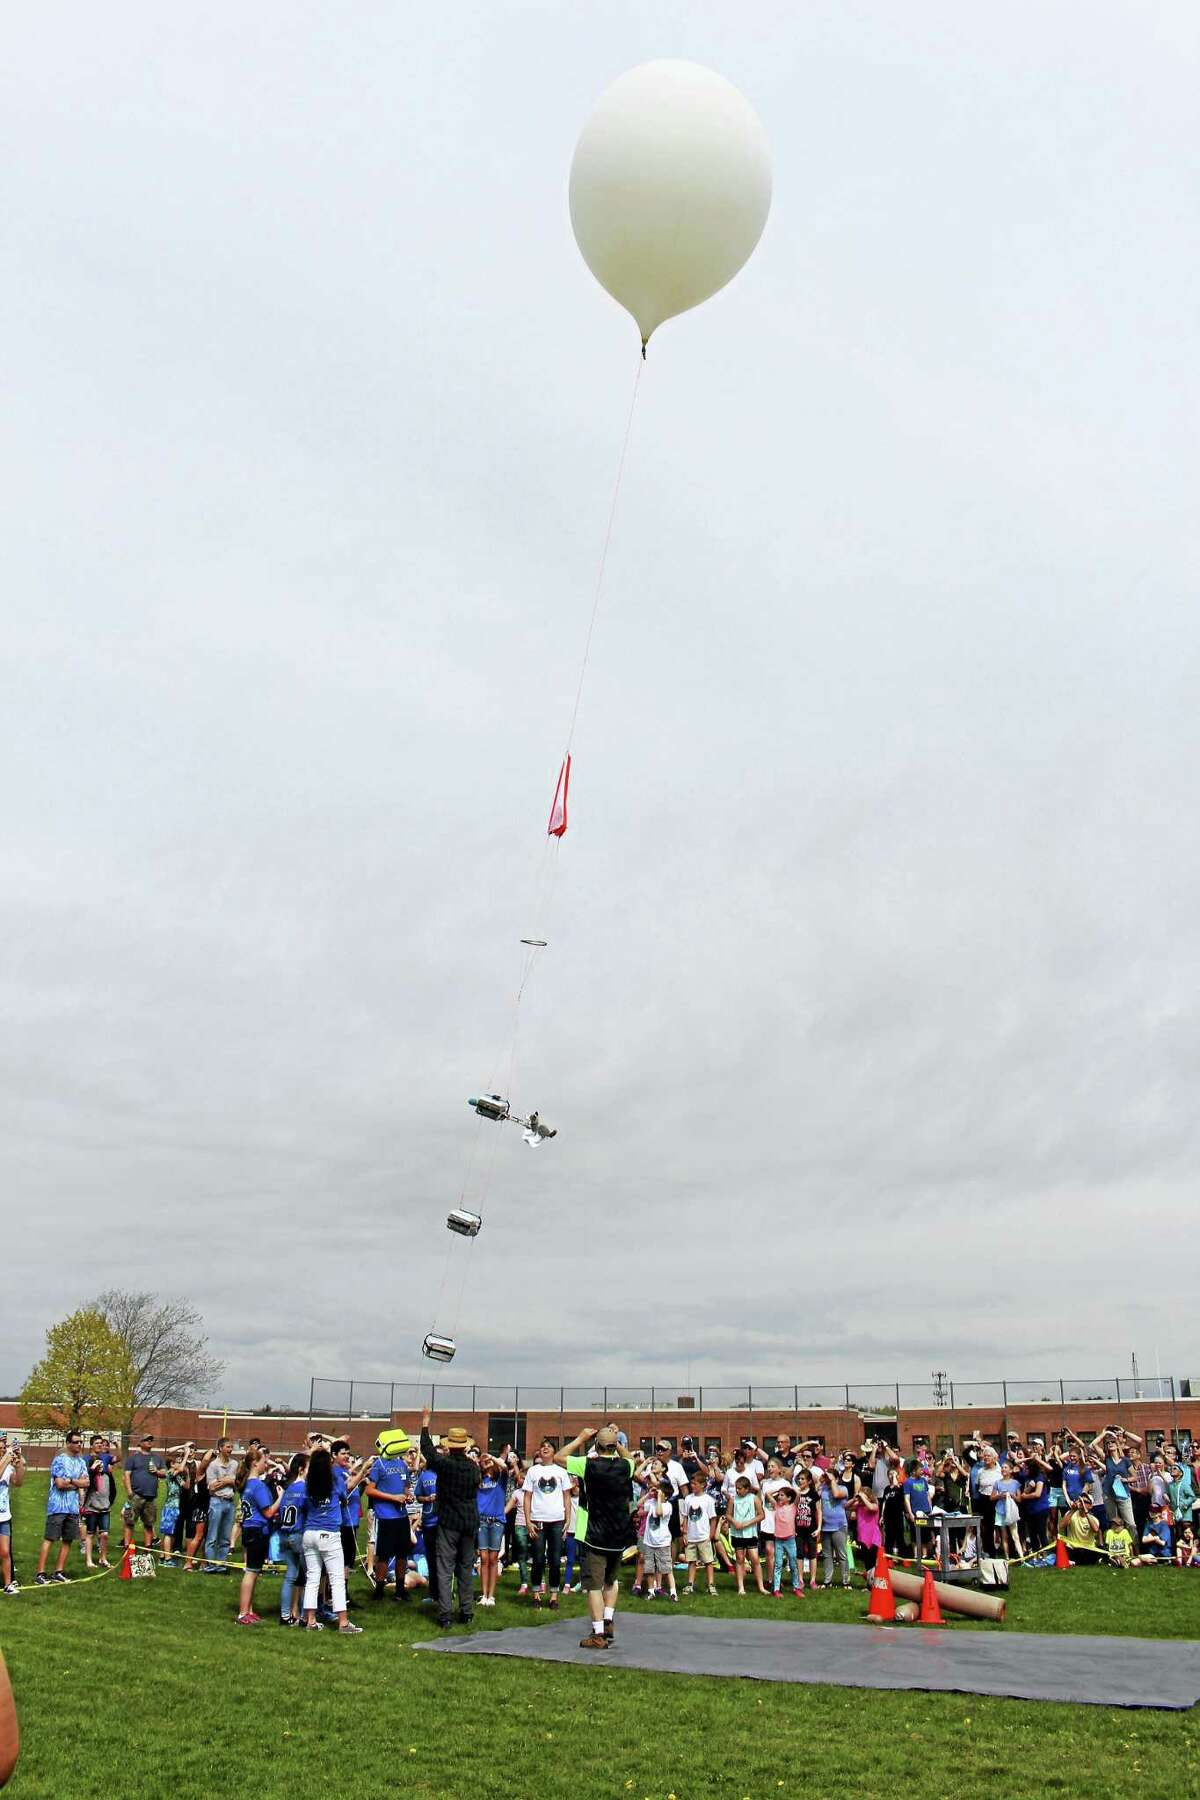 A crowd watches the StratoStar weather balloon launch from the Lewis Mills High School campus in Burlington. The event was part of a science-focused day of activities for students and parents.